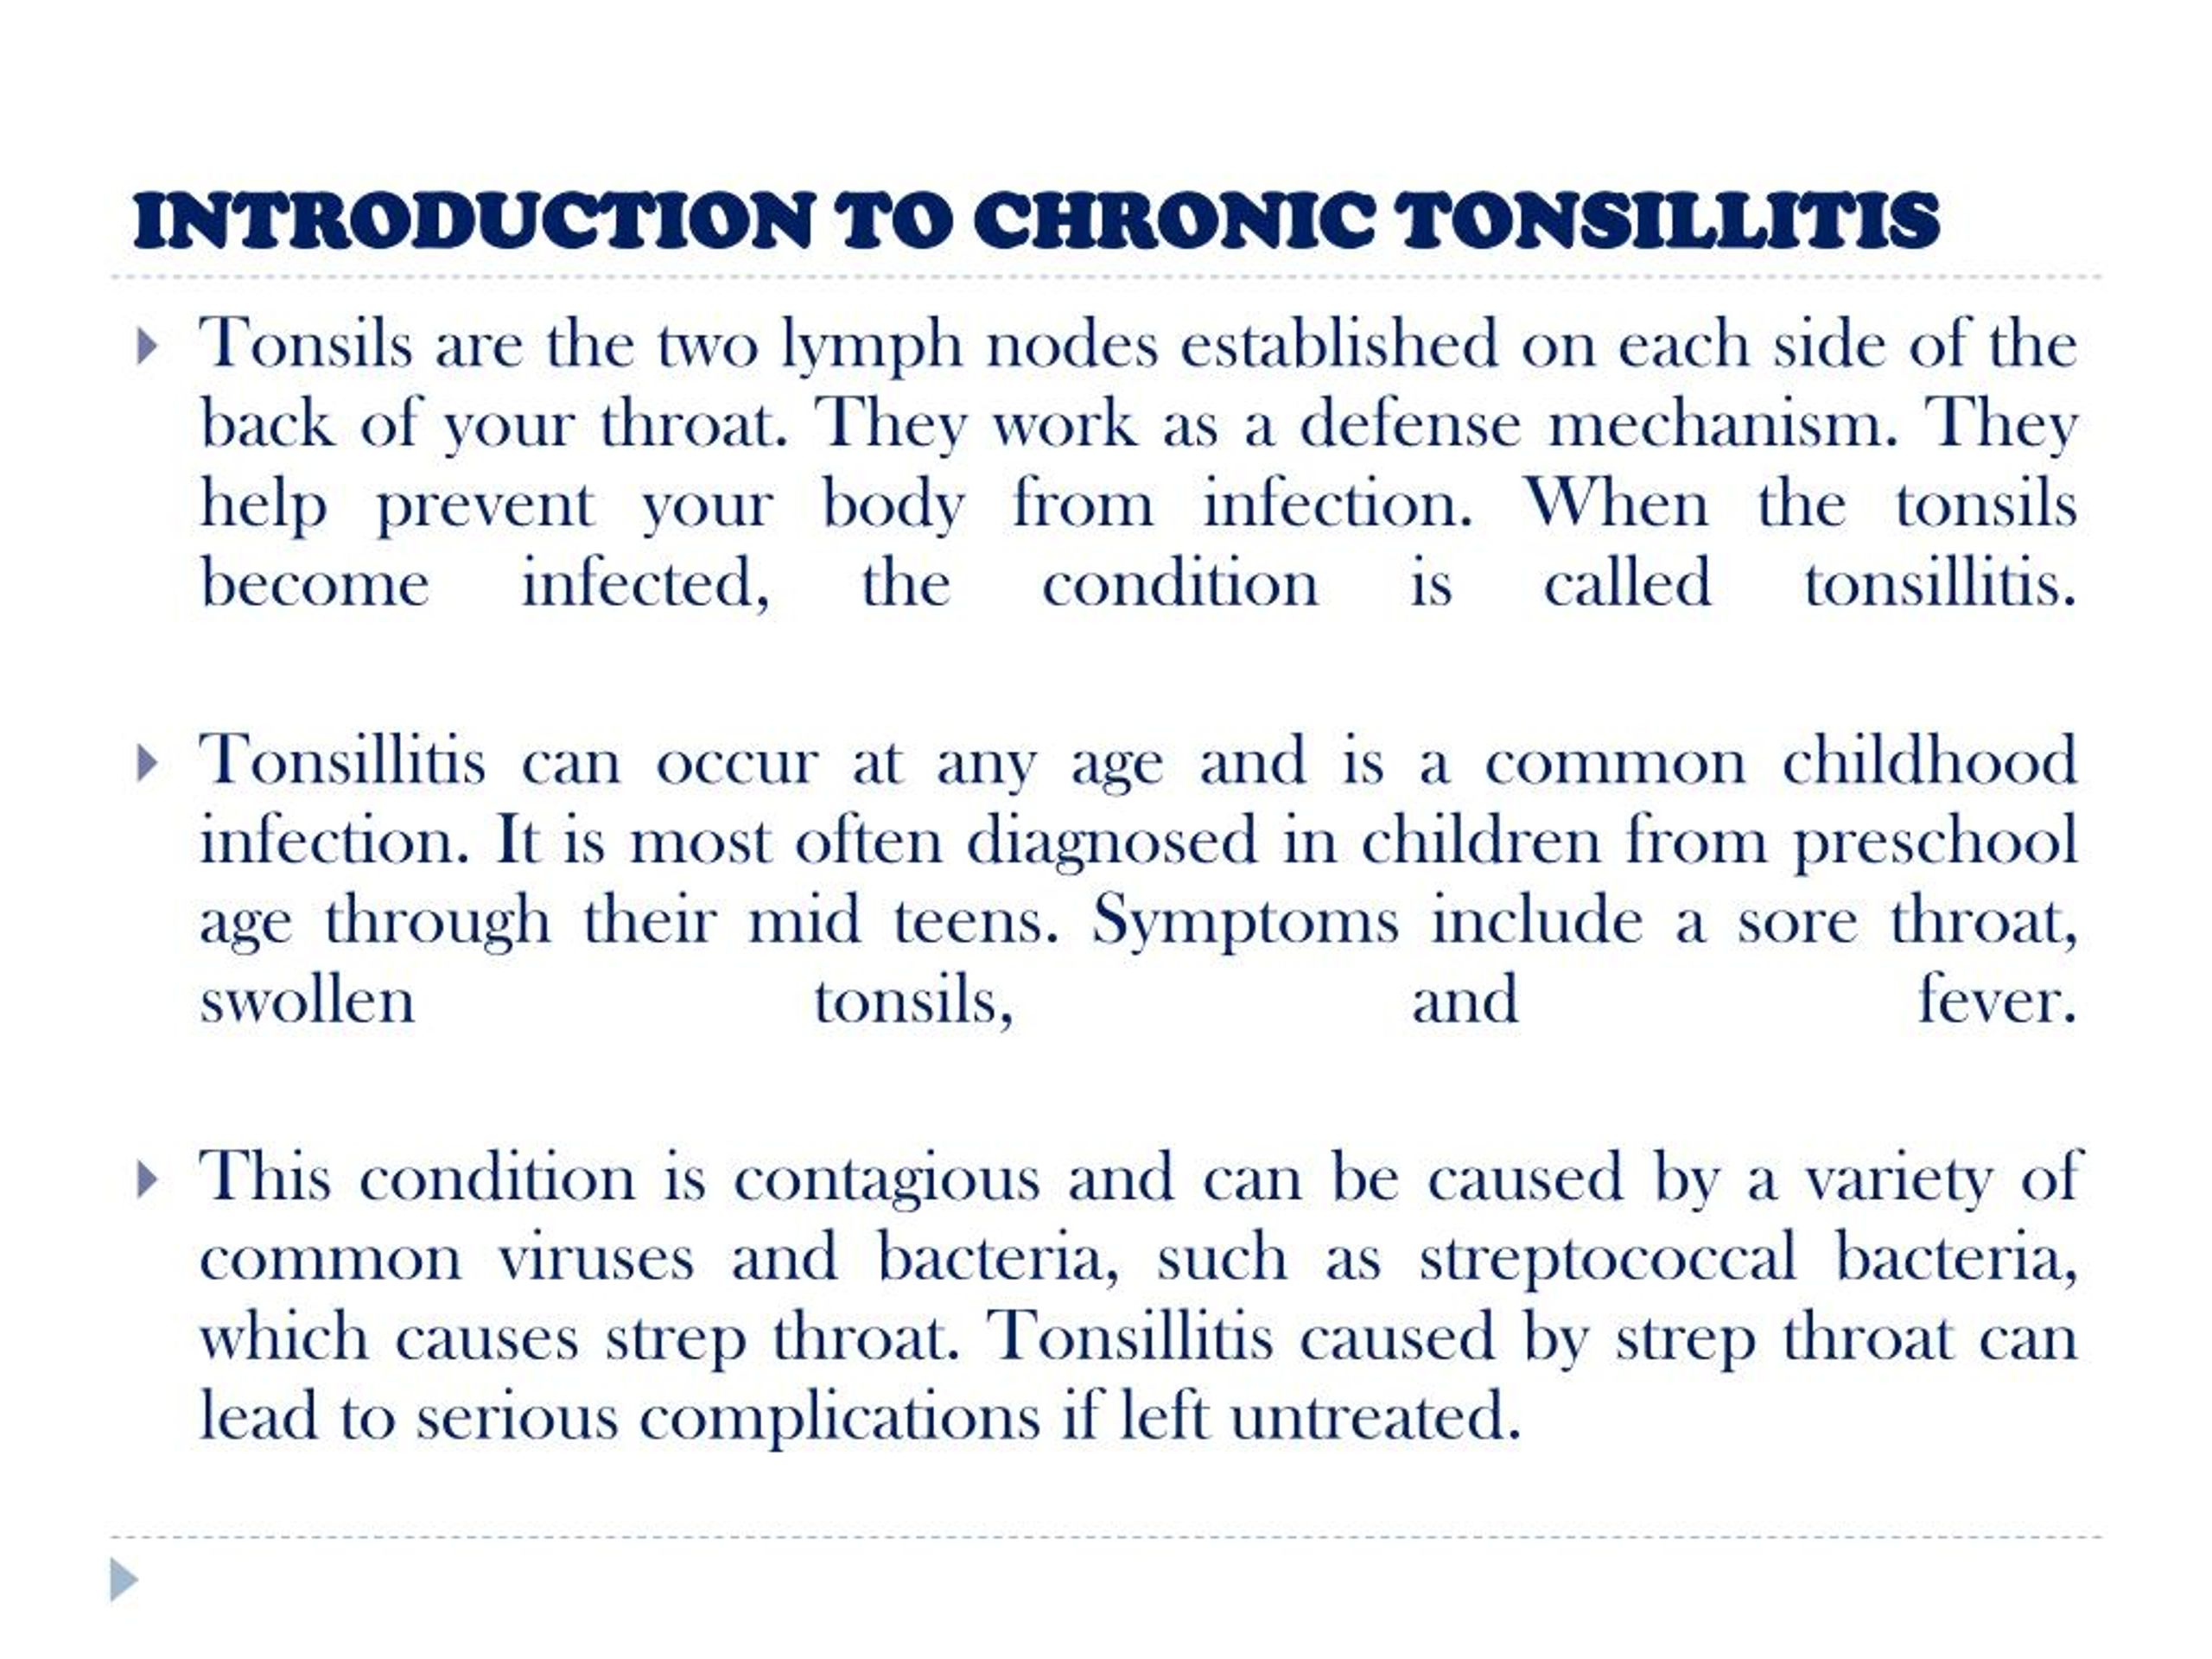 Ppt Chronic Tonsillitis Symptoms Causes And Treatment Powerpoint